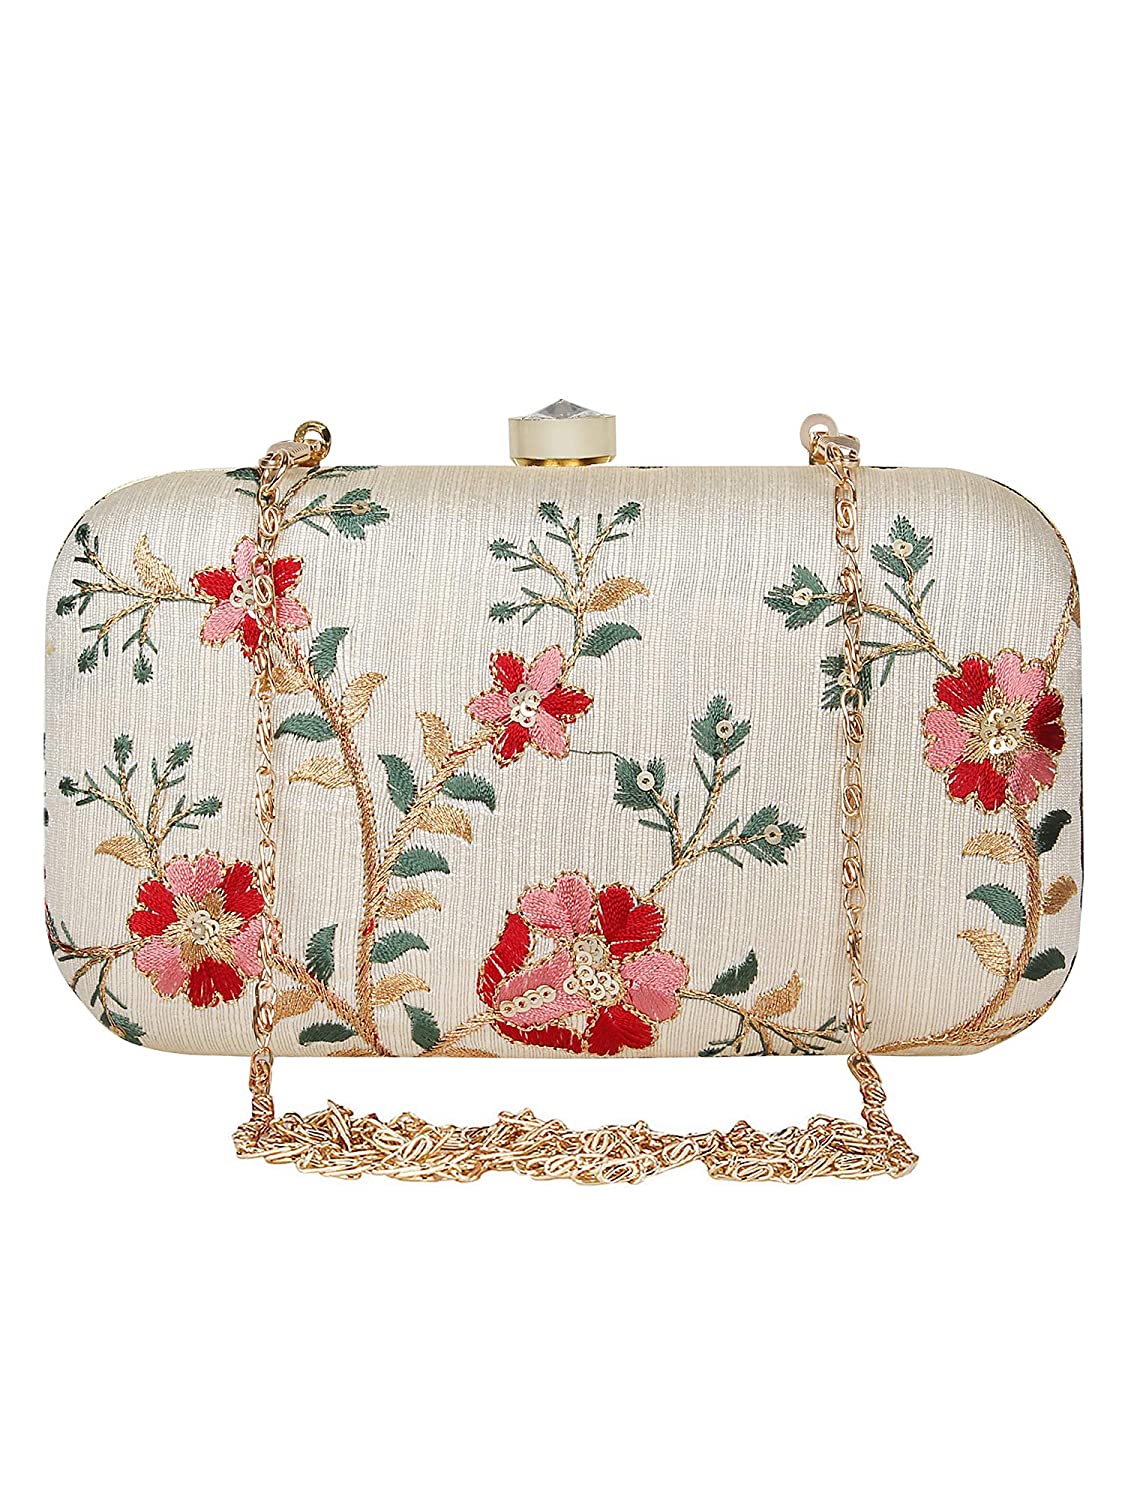 Women's White Color tulle Embroidered Faux Silk Clutch - VASTANS